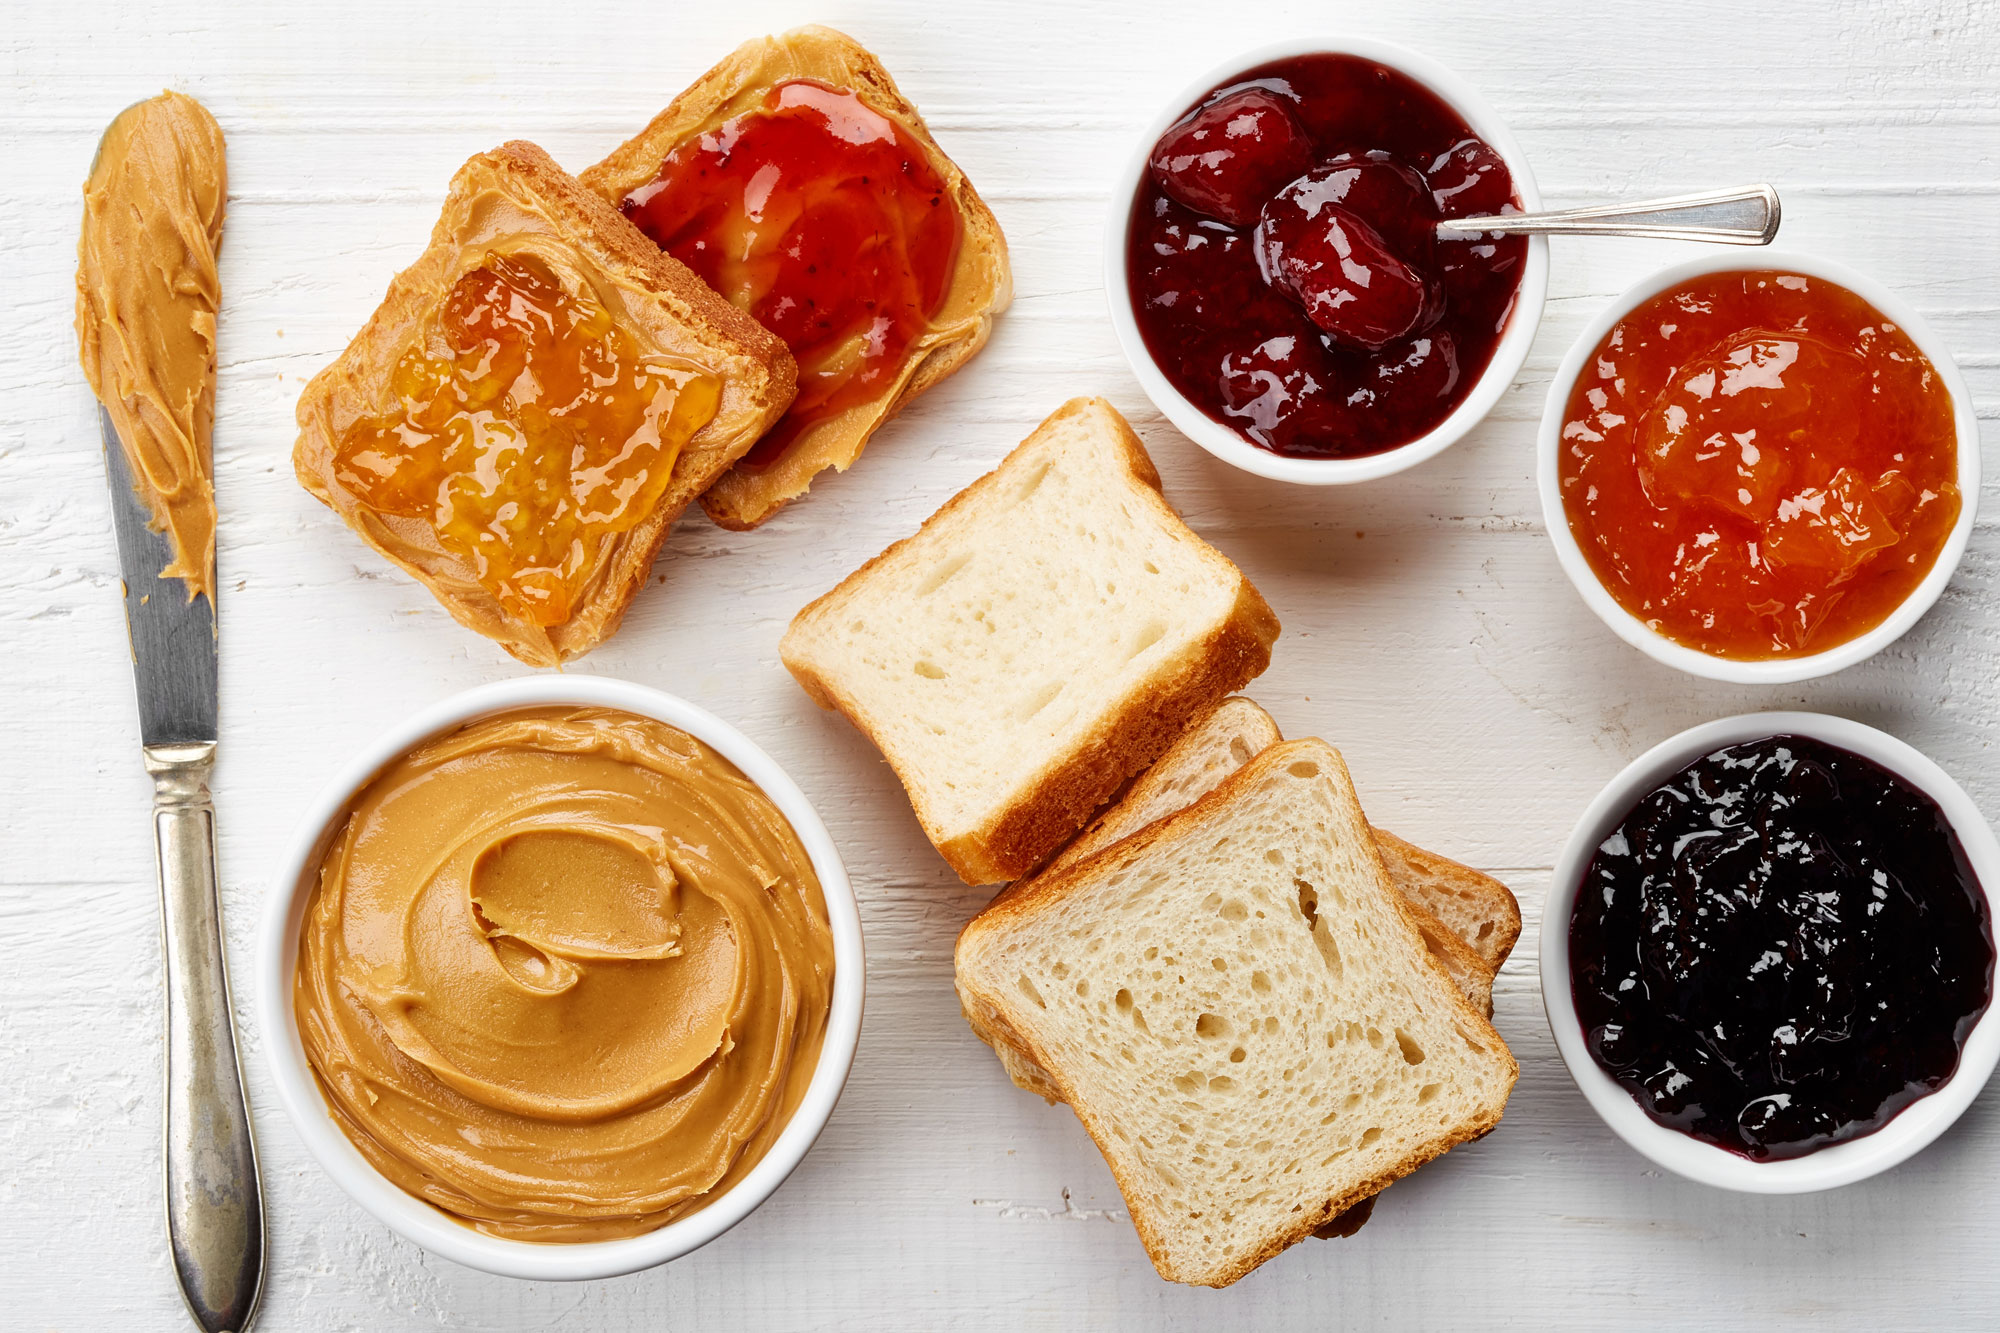 Don't Want to Cook? Serve a Peanut Butter and Jelly Buffet!